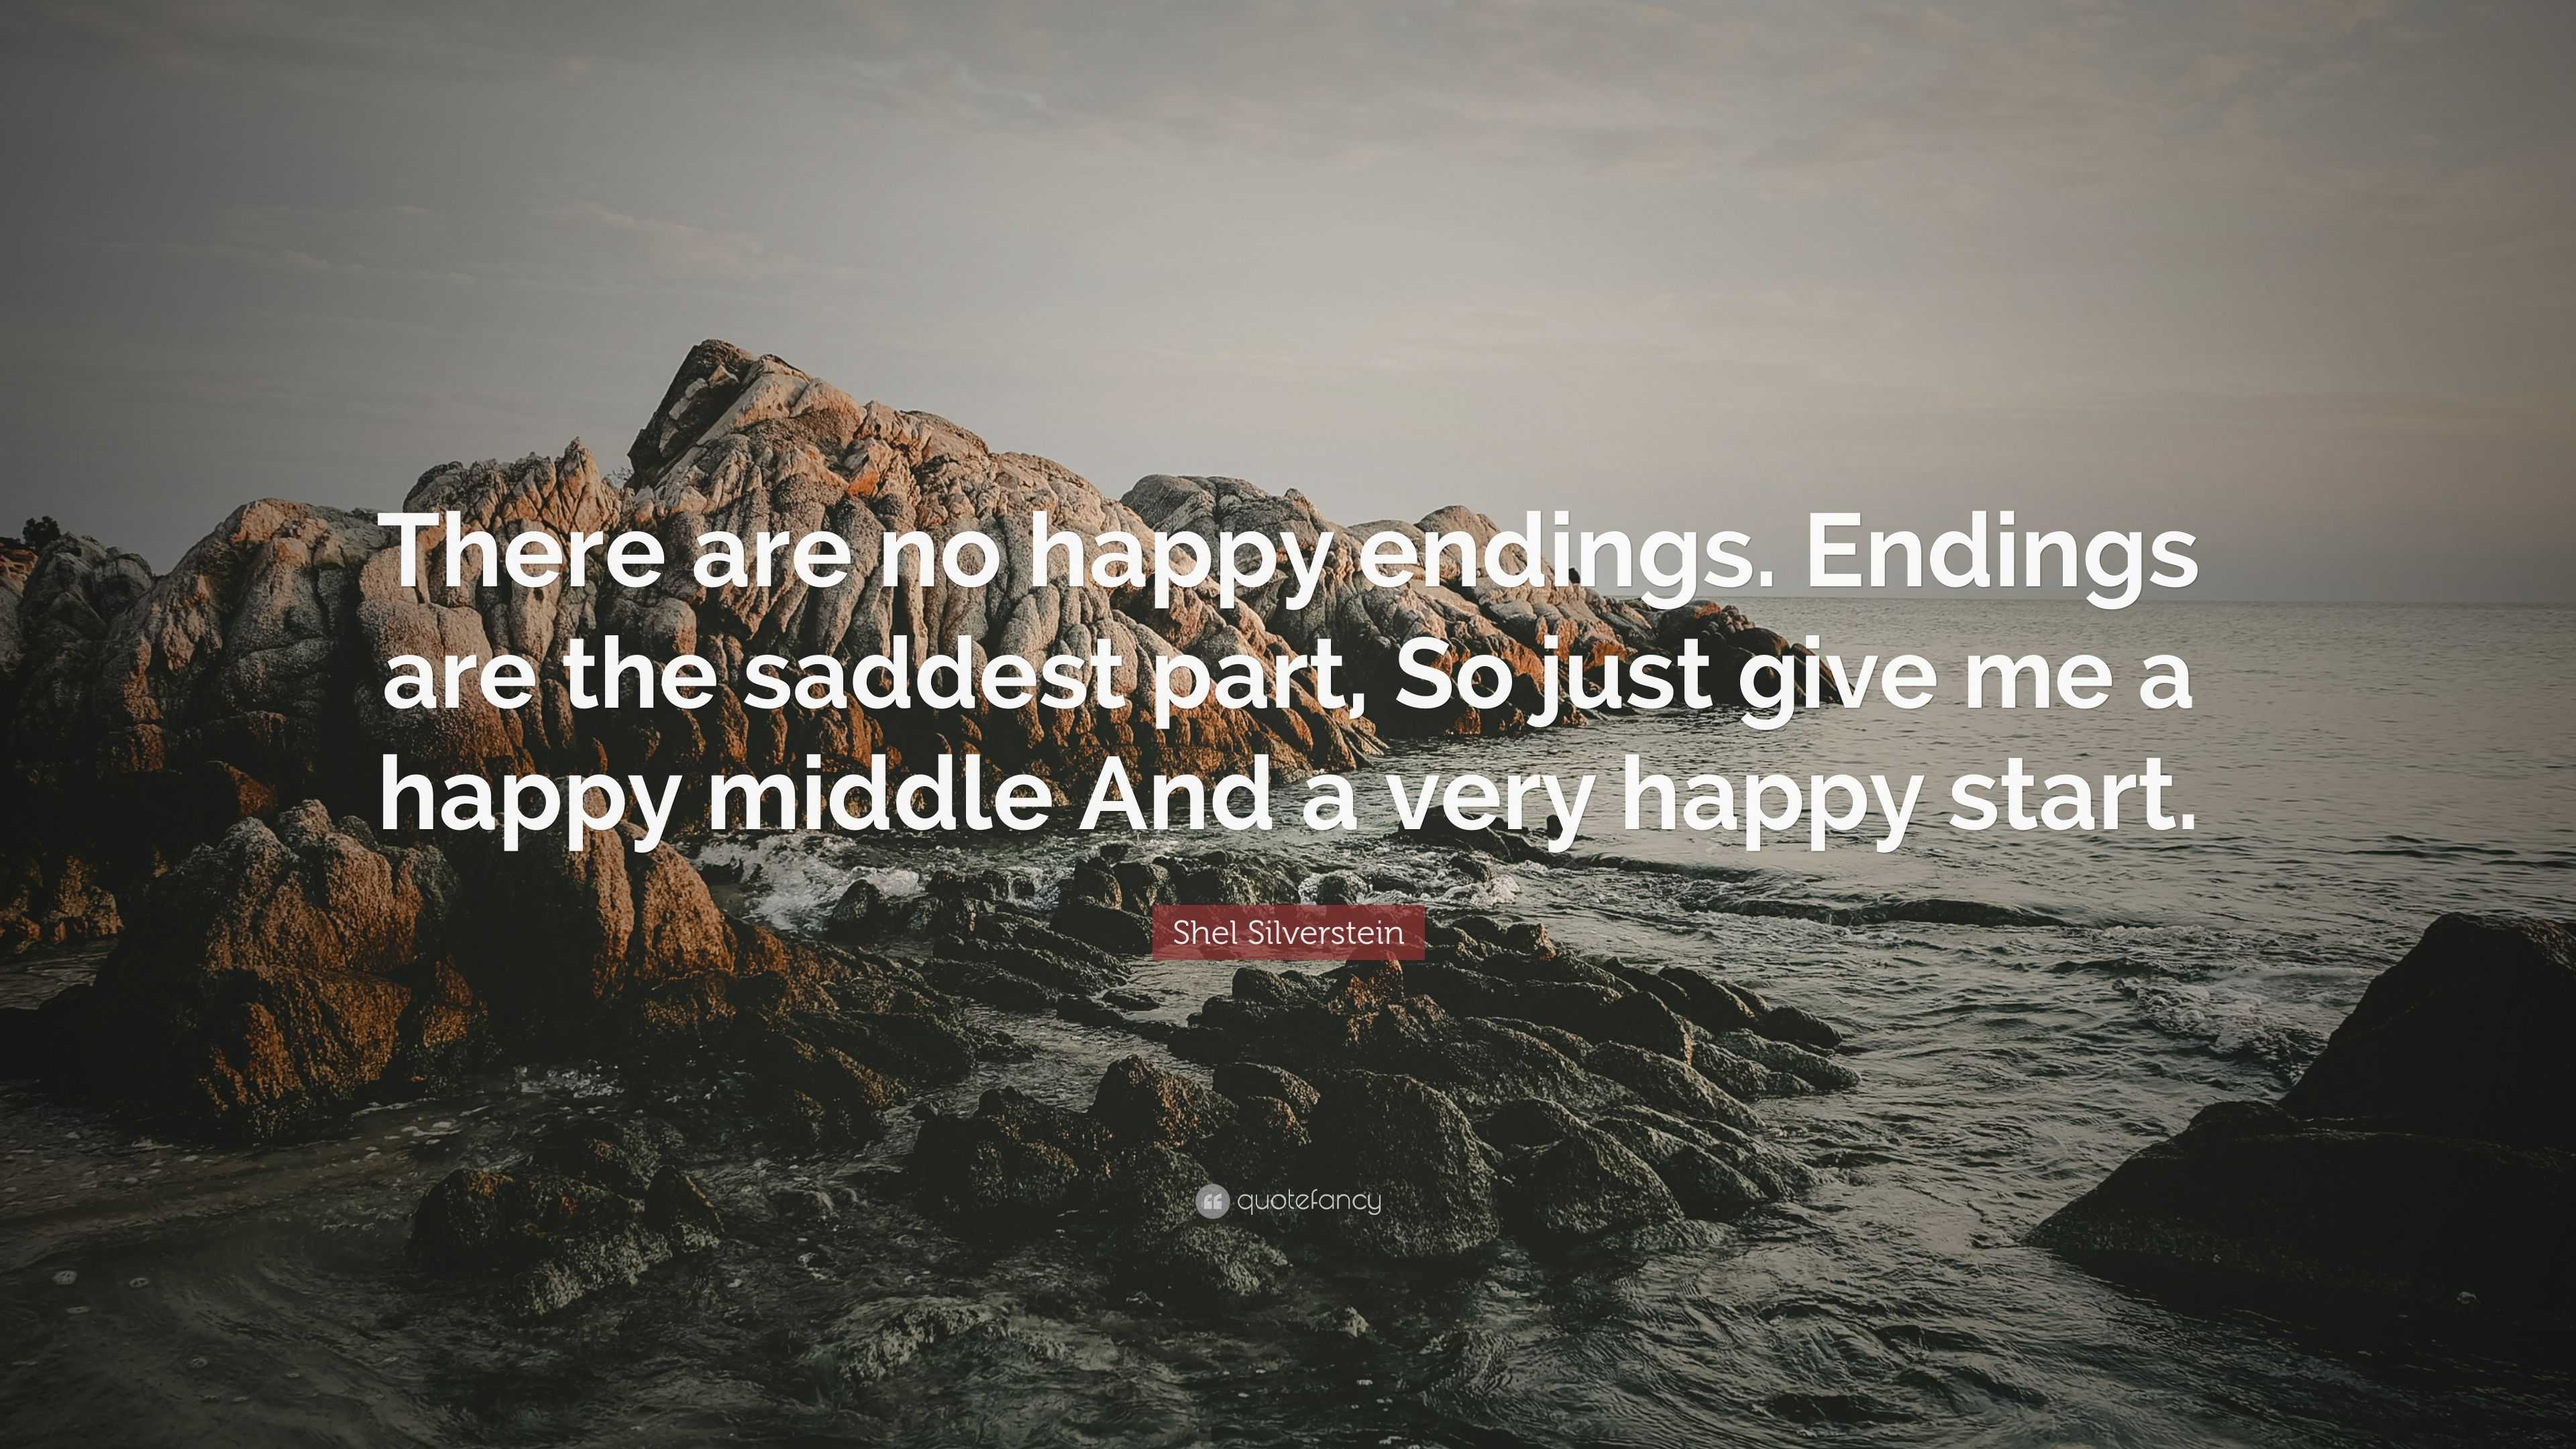 Shel Silverstein Quote: “There are no happy endings. Endings are the